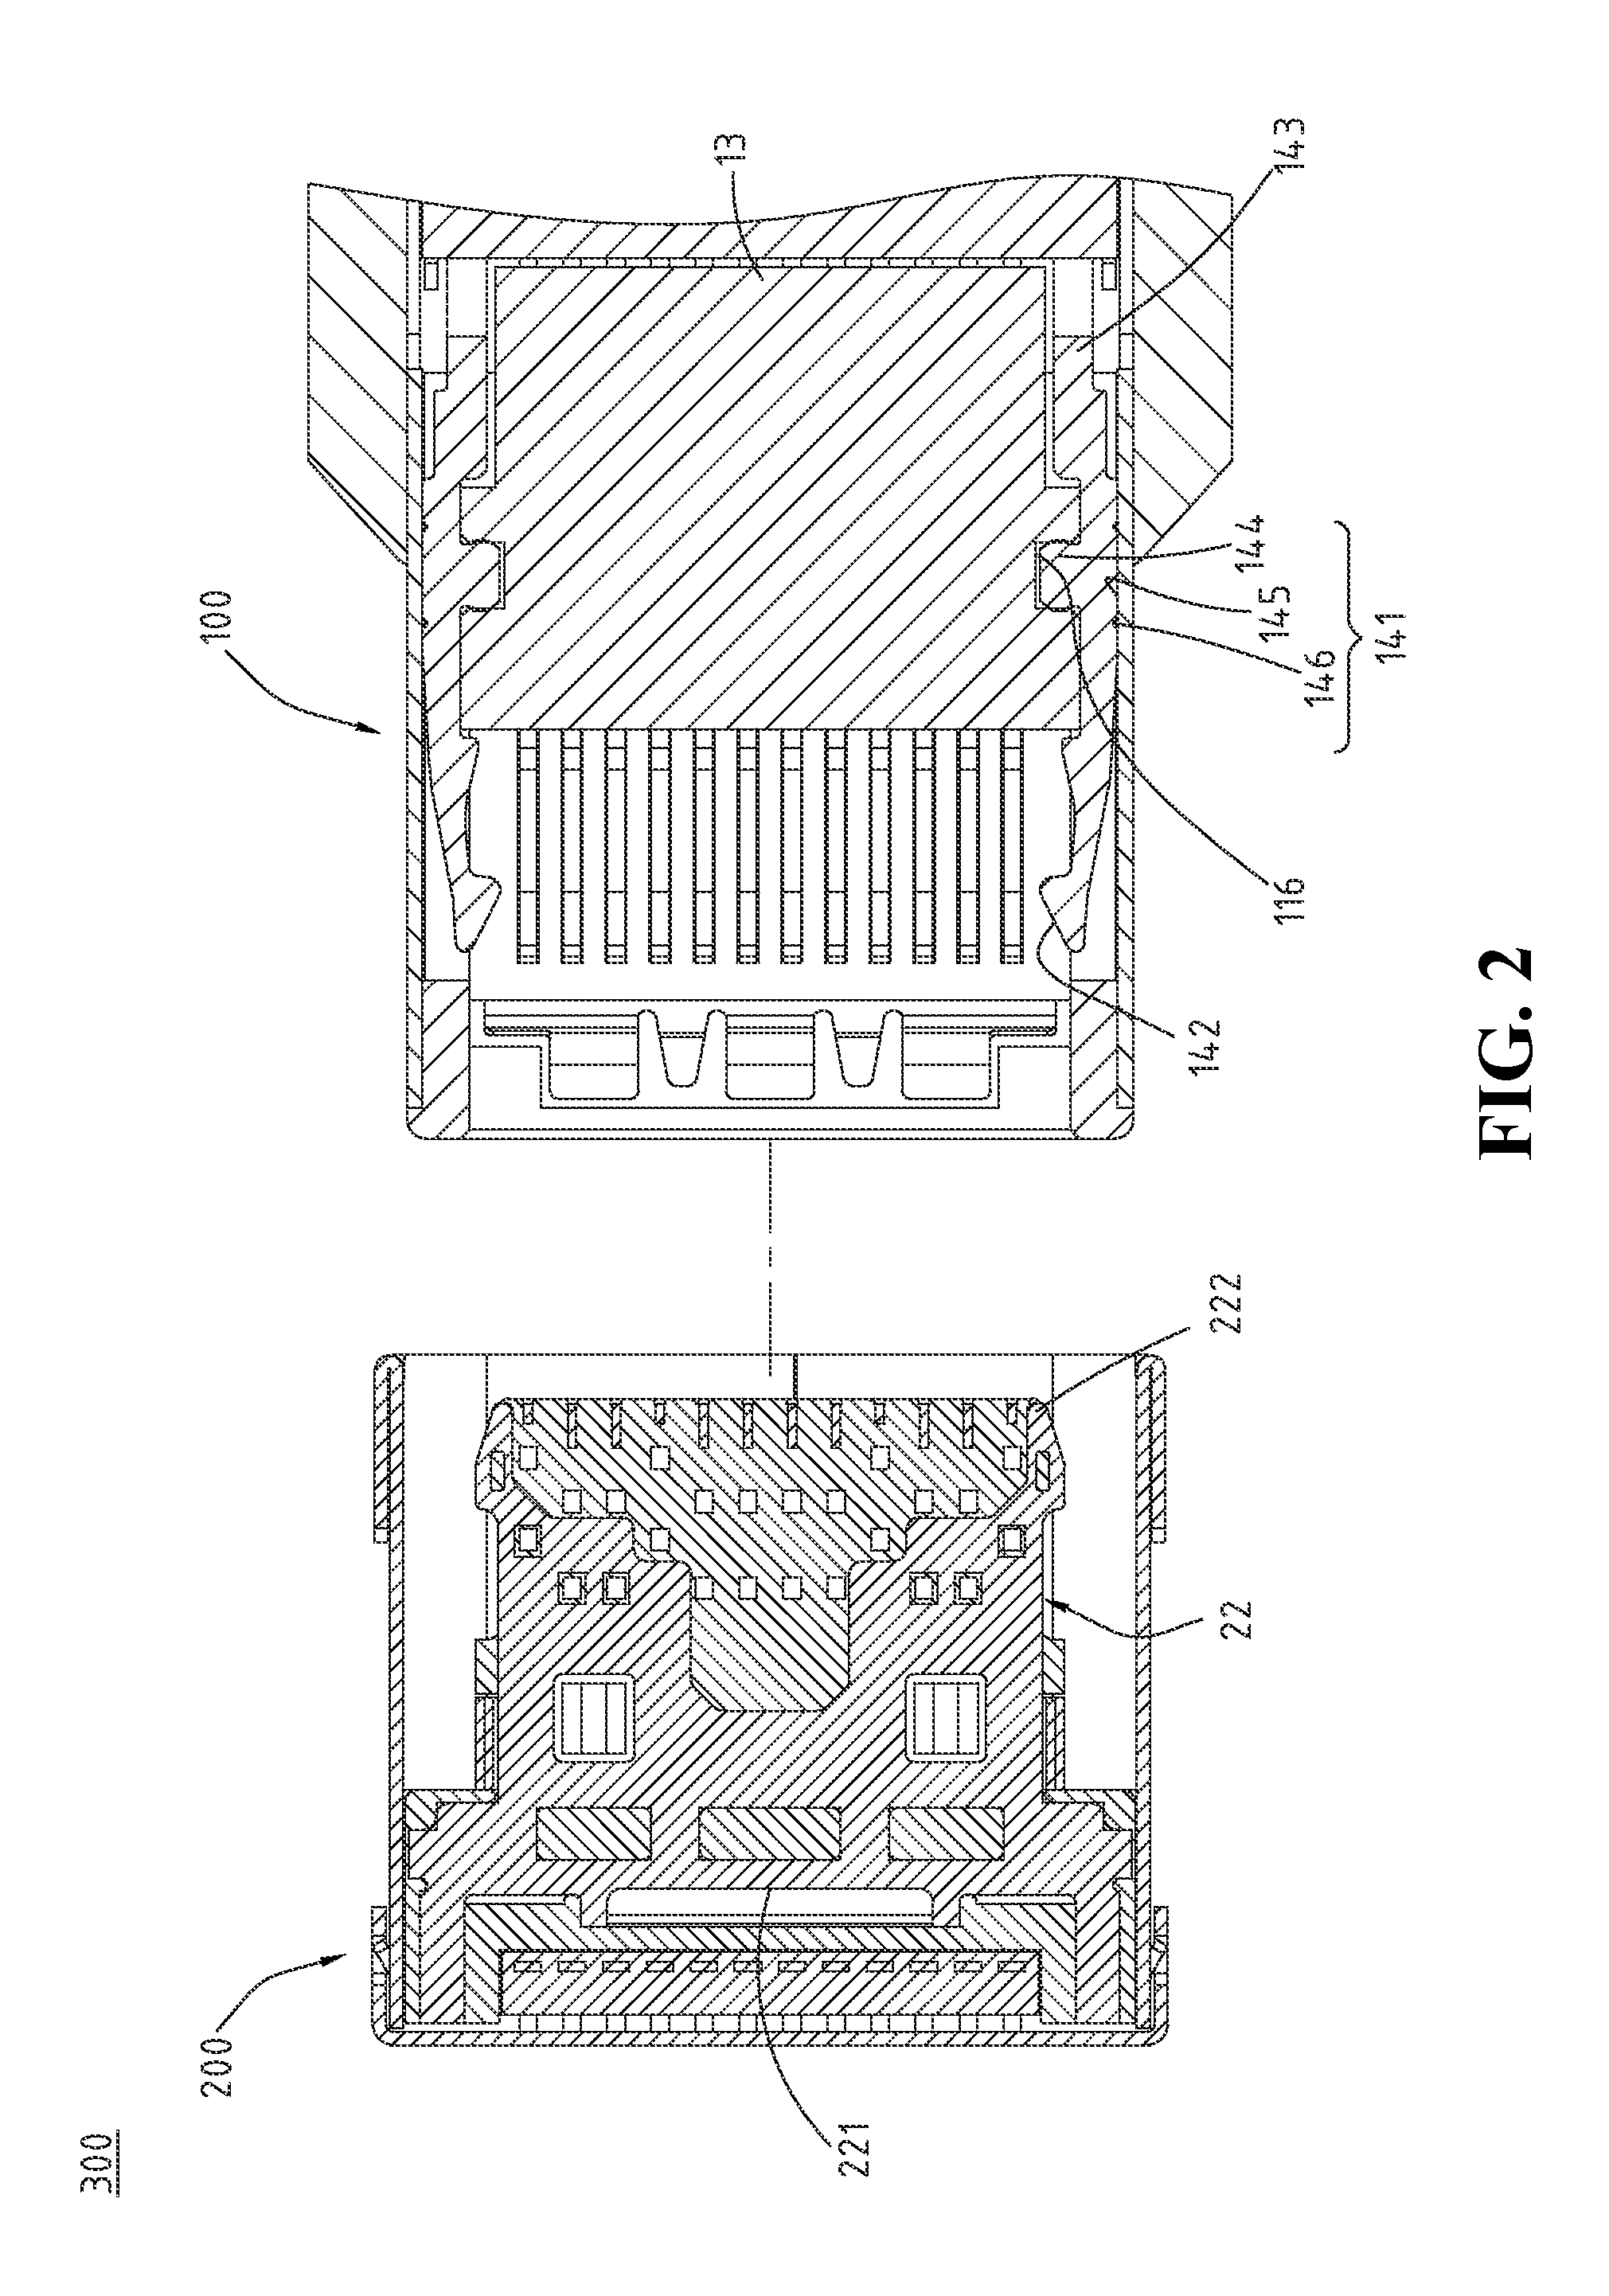 Electrical plug connector and electrical receptacle connector